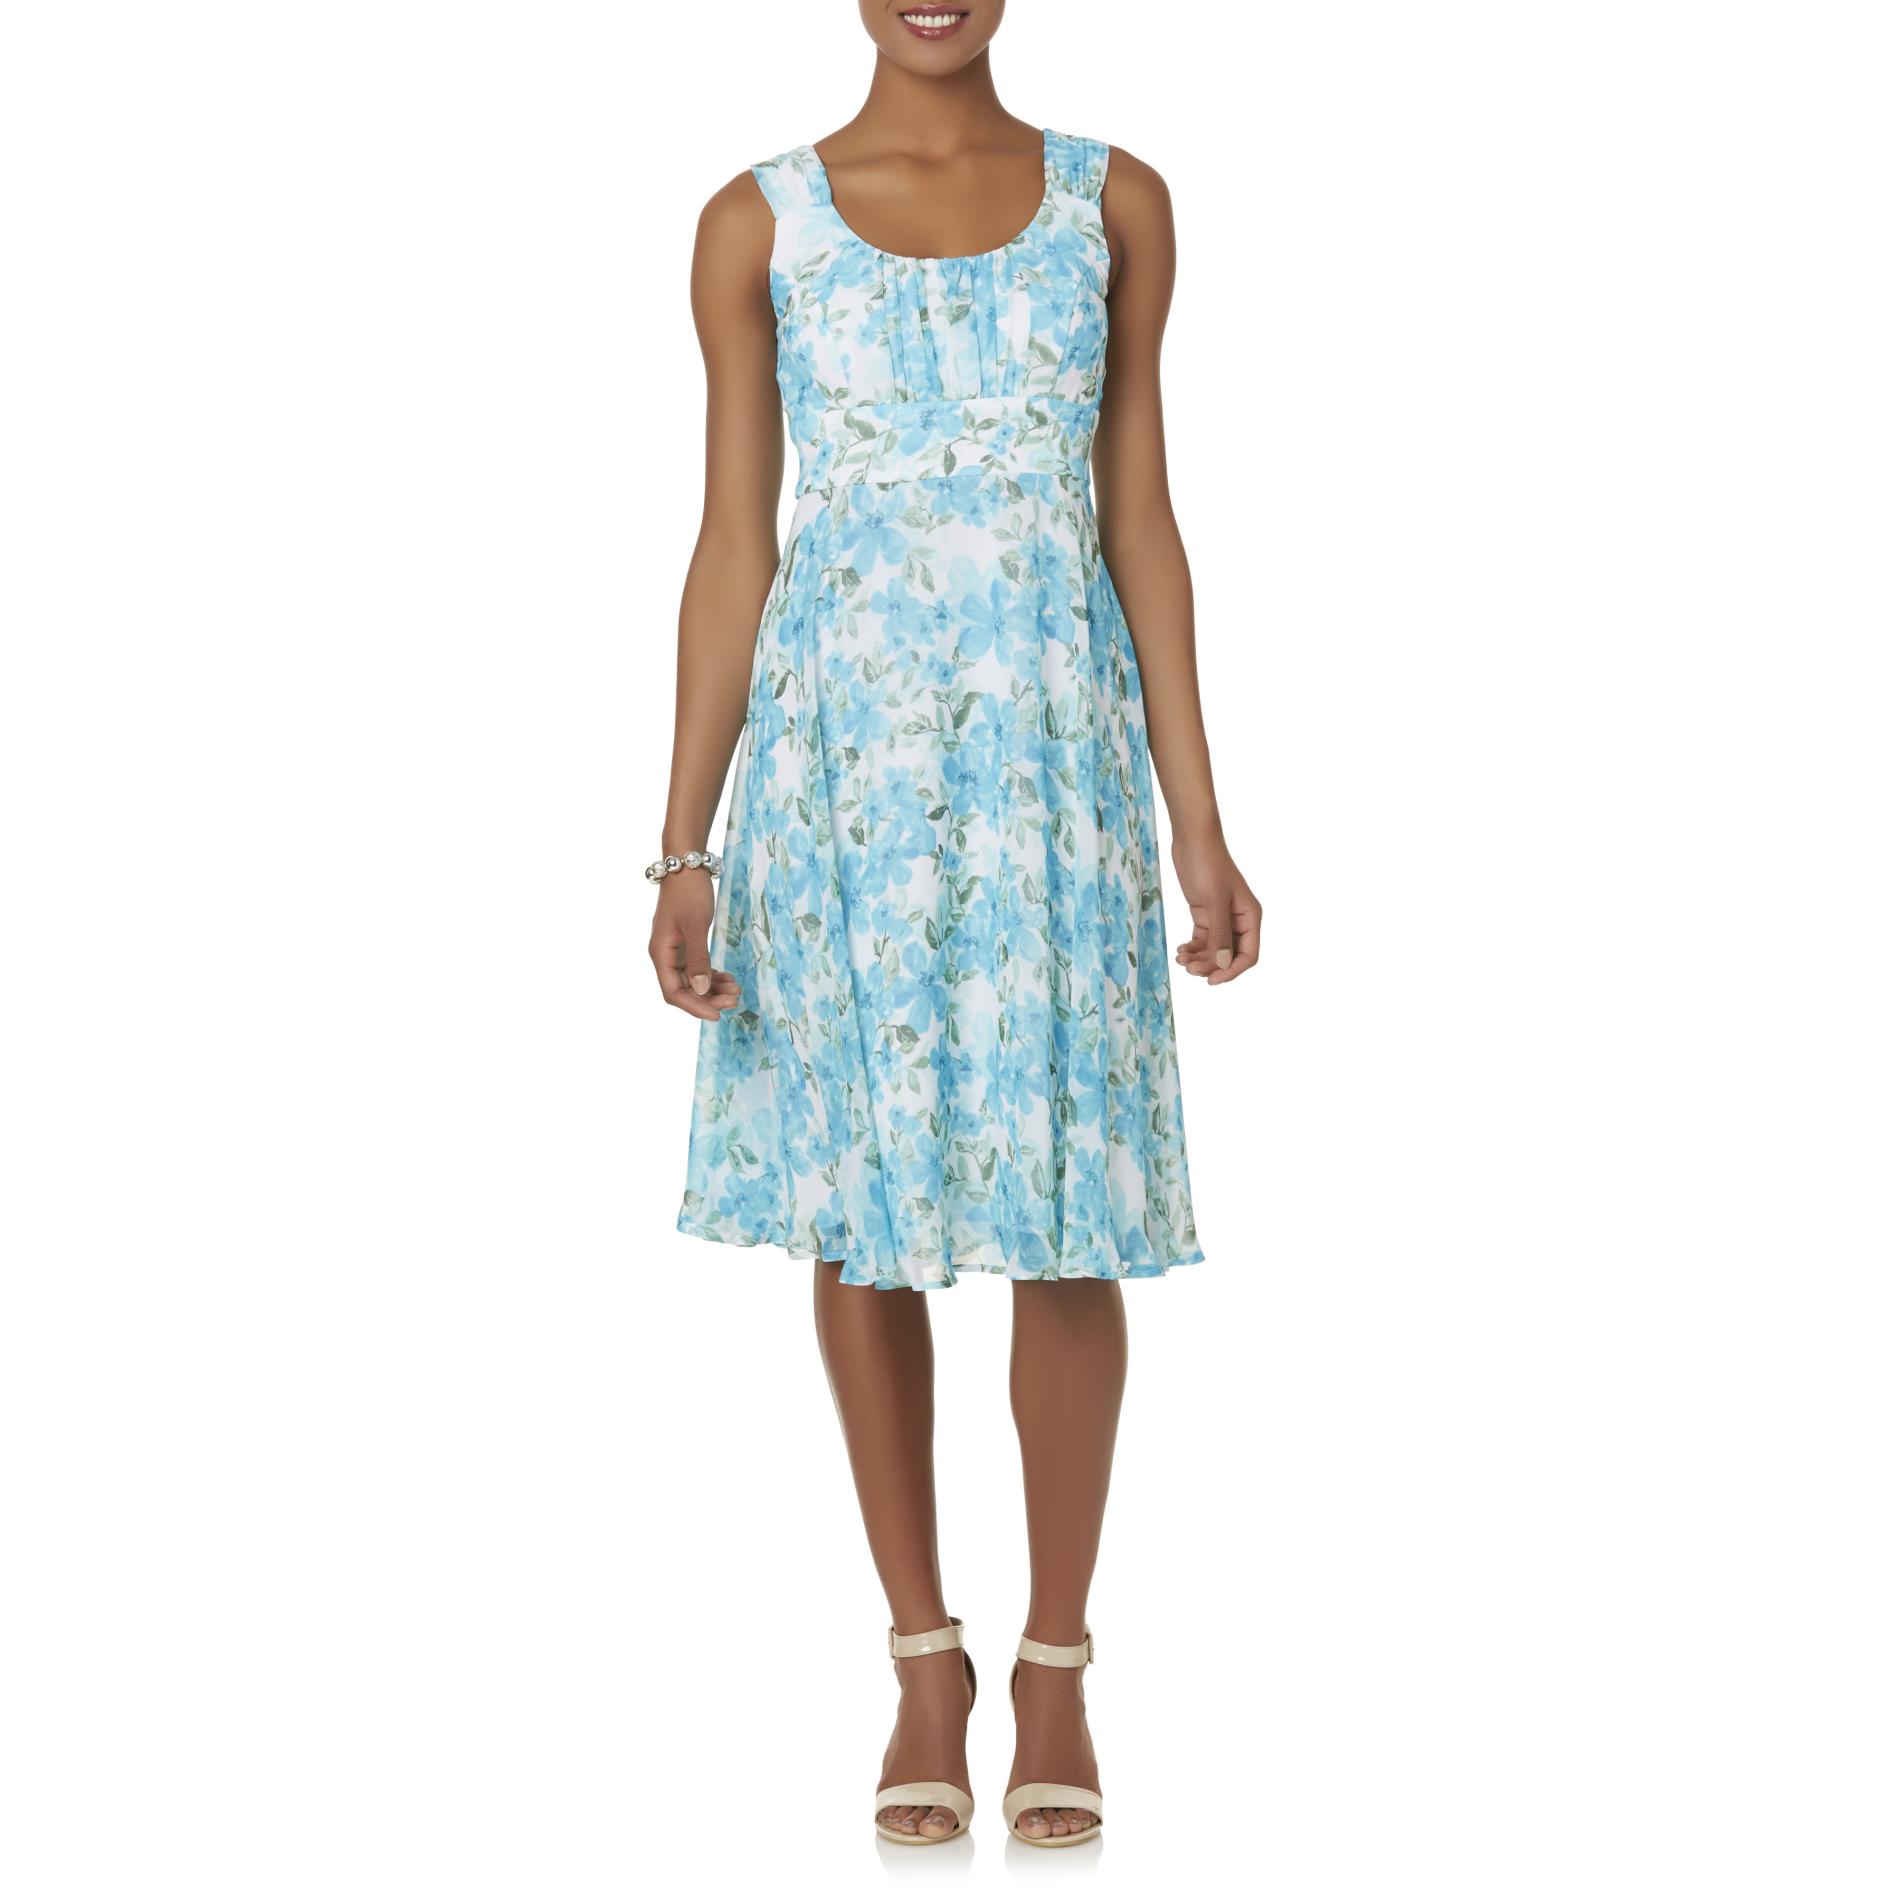 Connected Apparel Women's Fit & Flare Dress - Floral